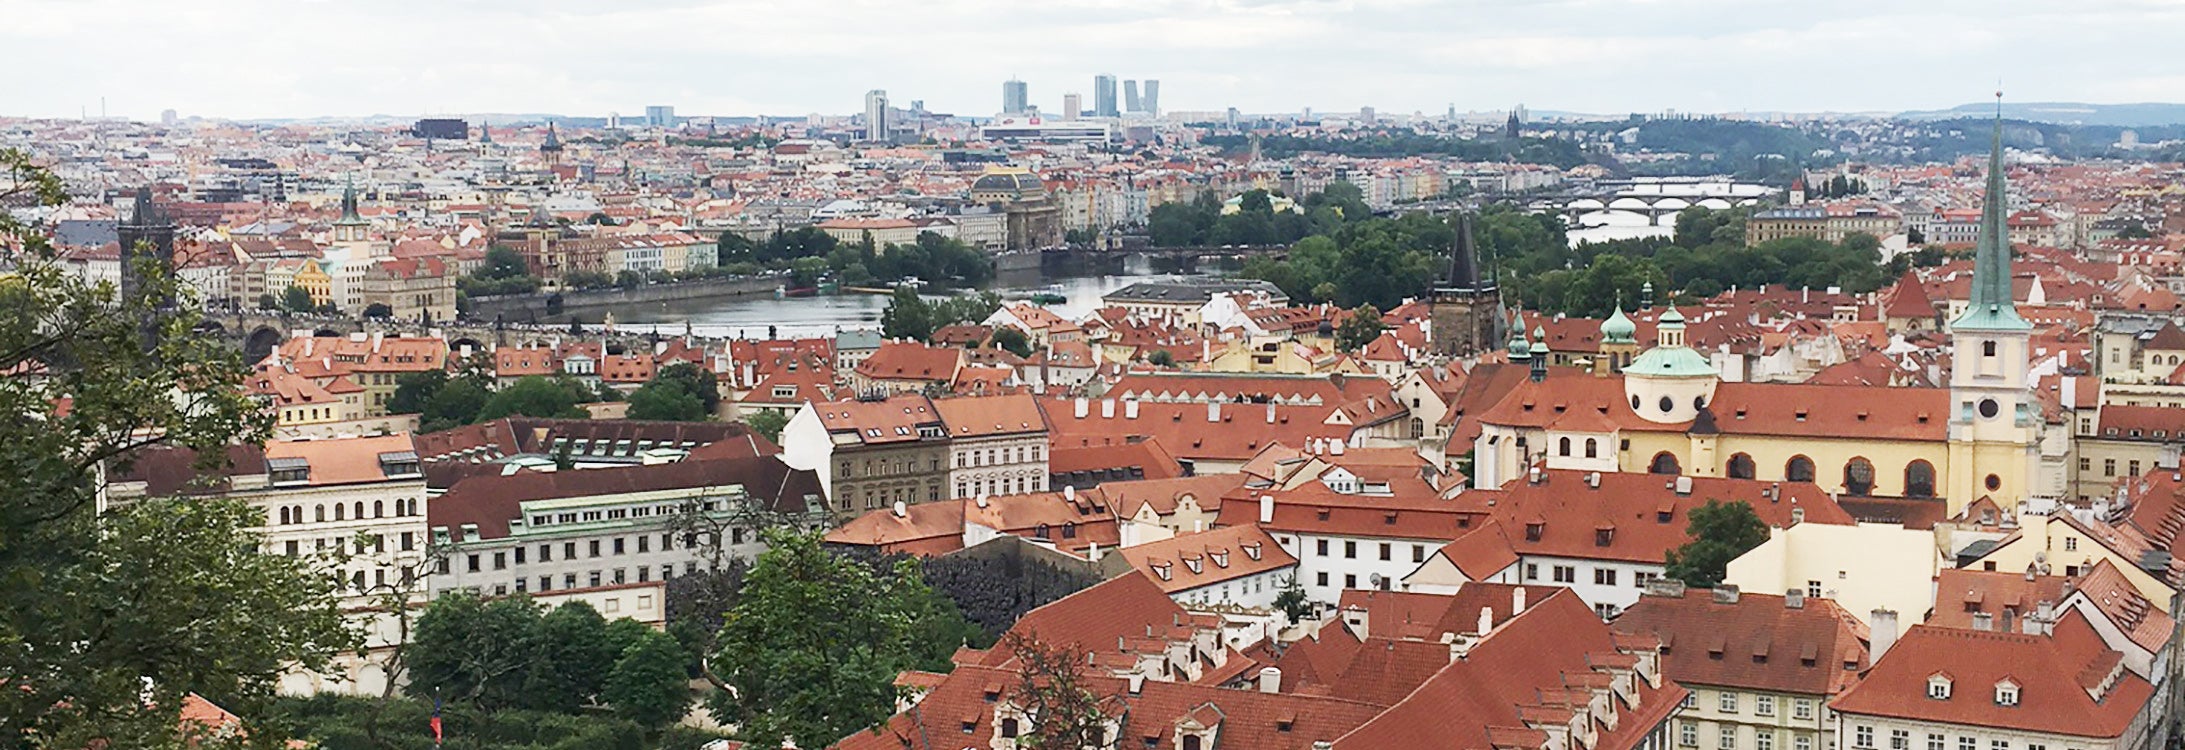 The Prague skyline as seen by the Hradčany Square outside of the Prague Castle.